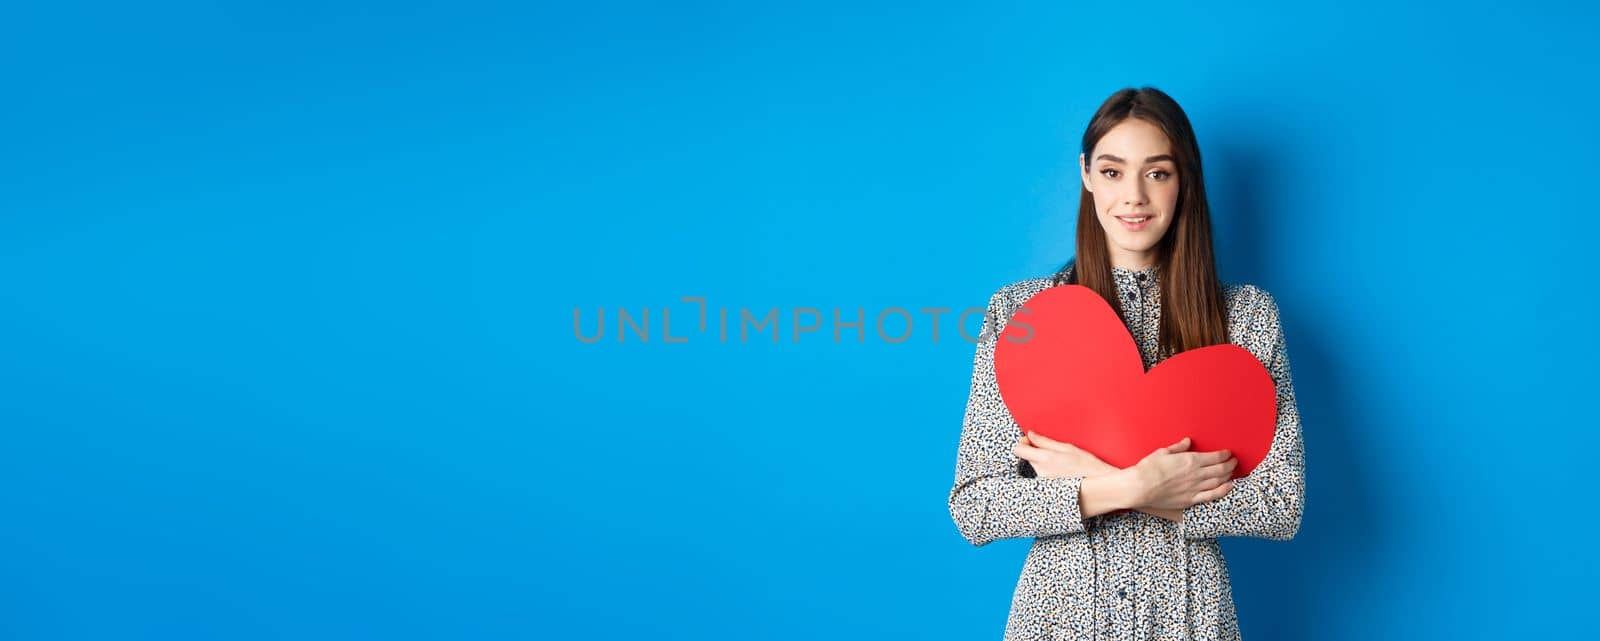 Valentines day. Attractive young woman searching for love, holding big red heart cutout and smiling at camera, standing in dress on blue background.